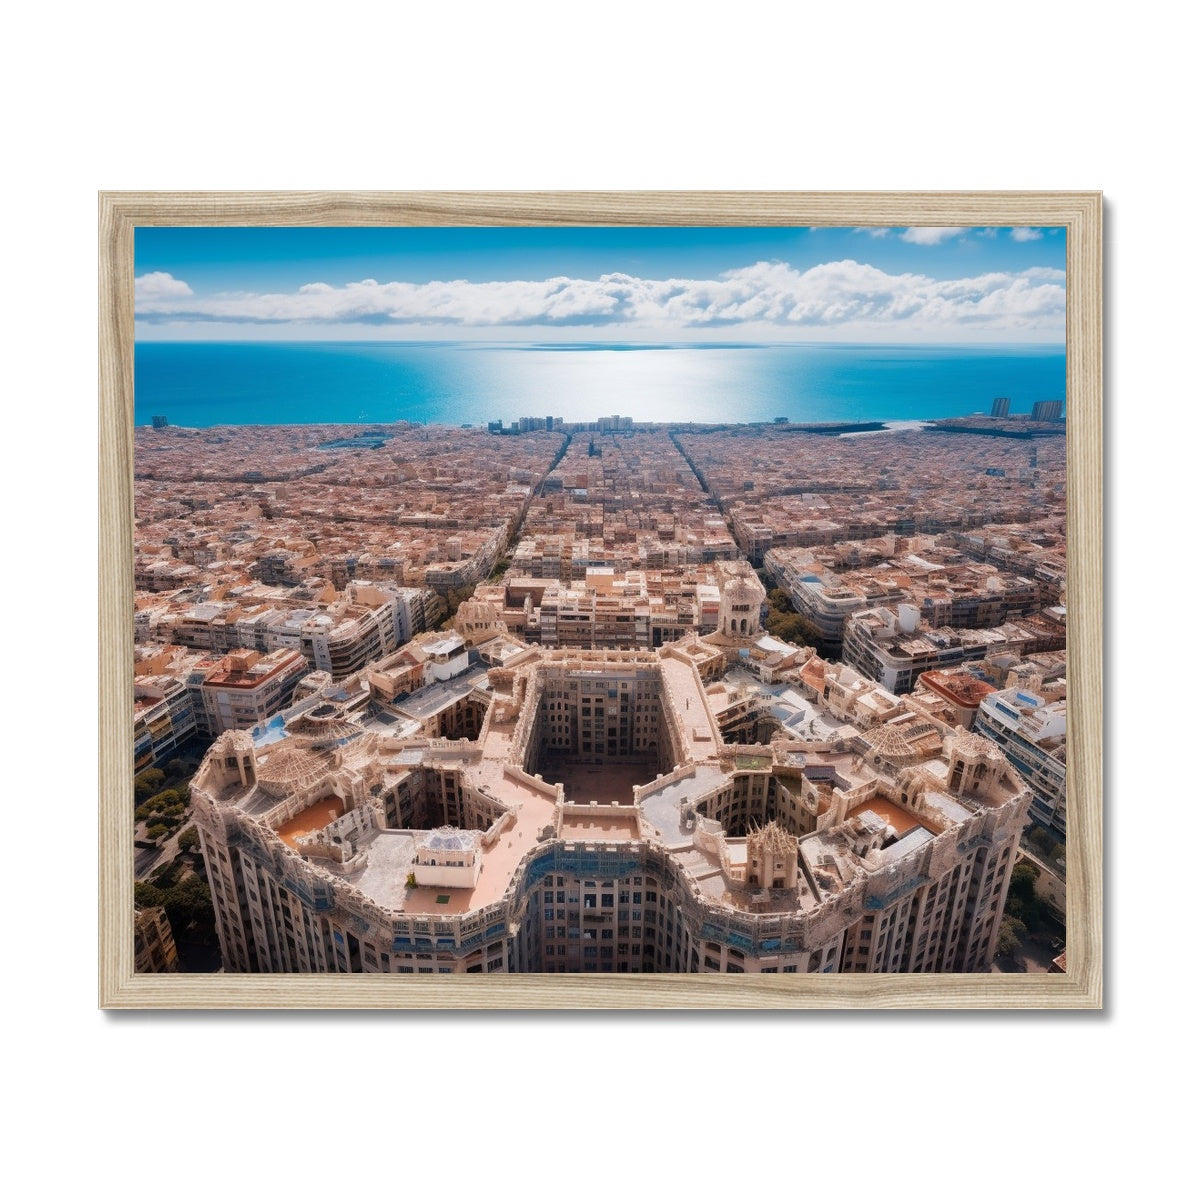 Barcelona Architecture From The Sky  Framed Print